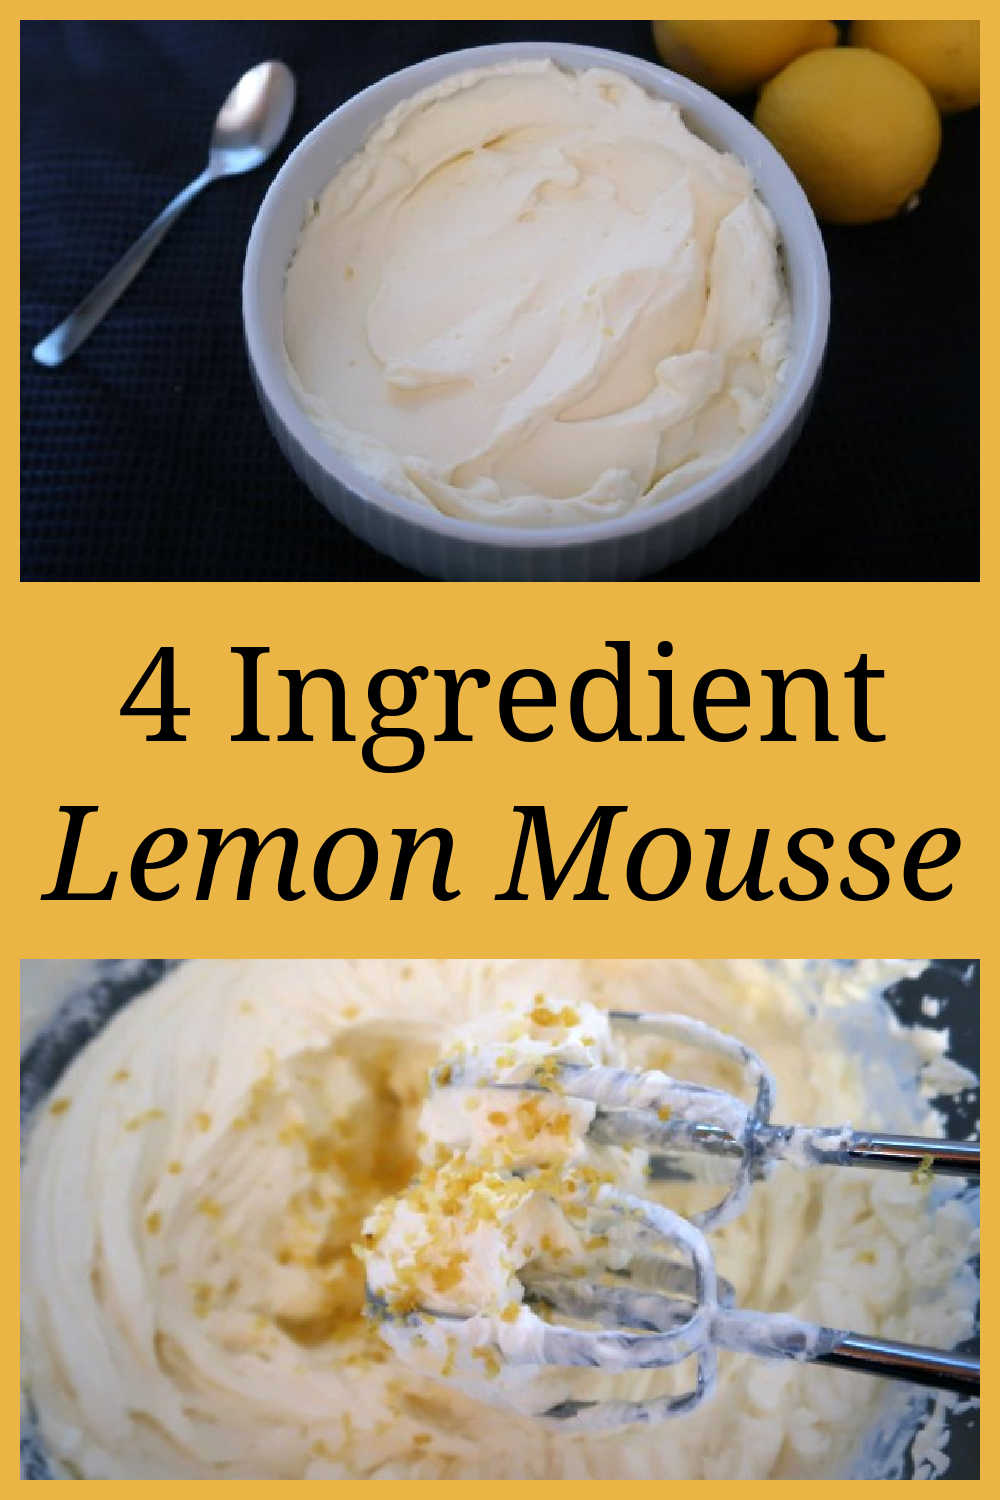 Lemon Mousse Recipe - Easy no bake 4 ingredient cream cheese desserts - quick & cheap light cheesecake flavored dessert idea - with the video.